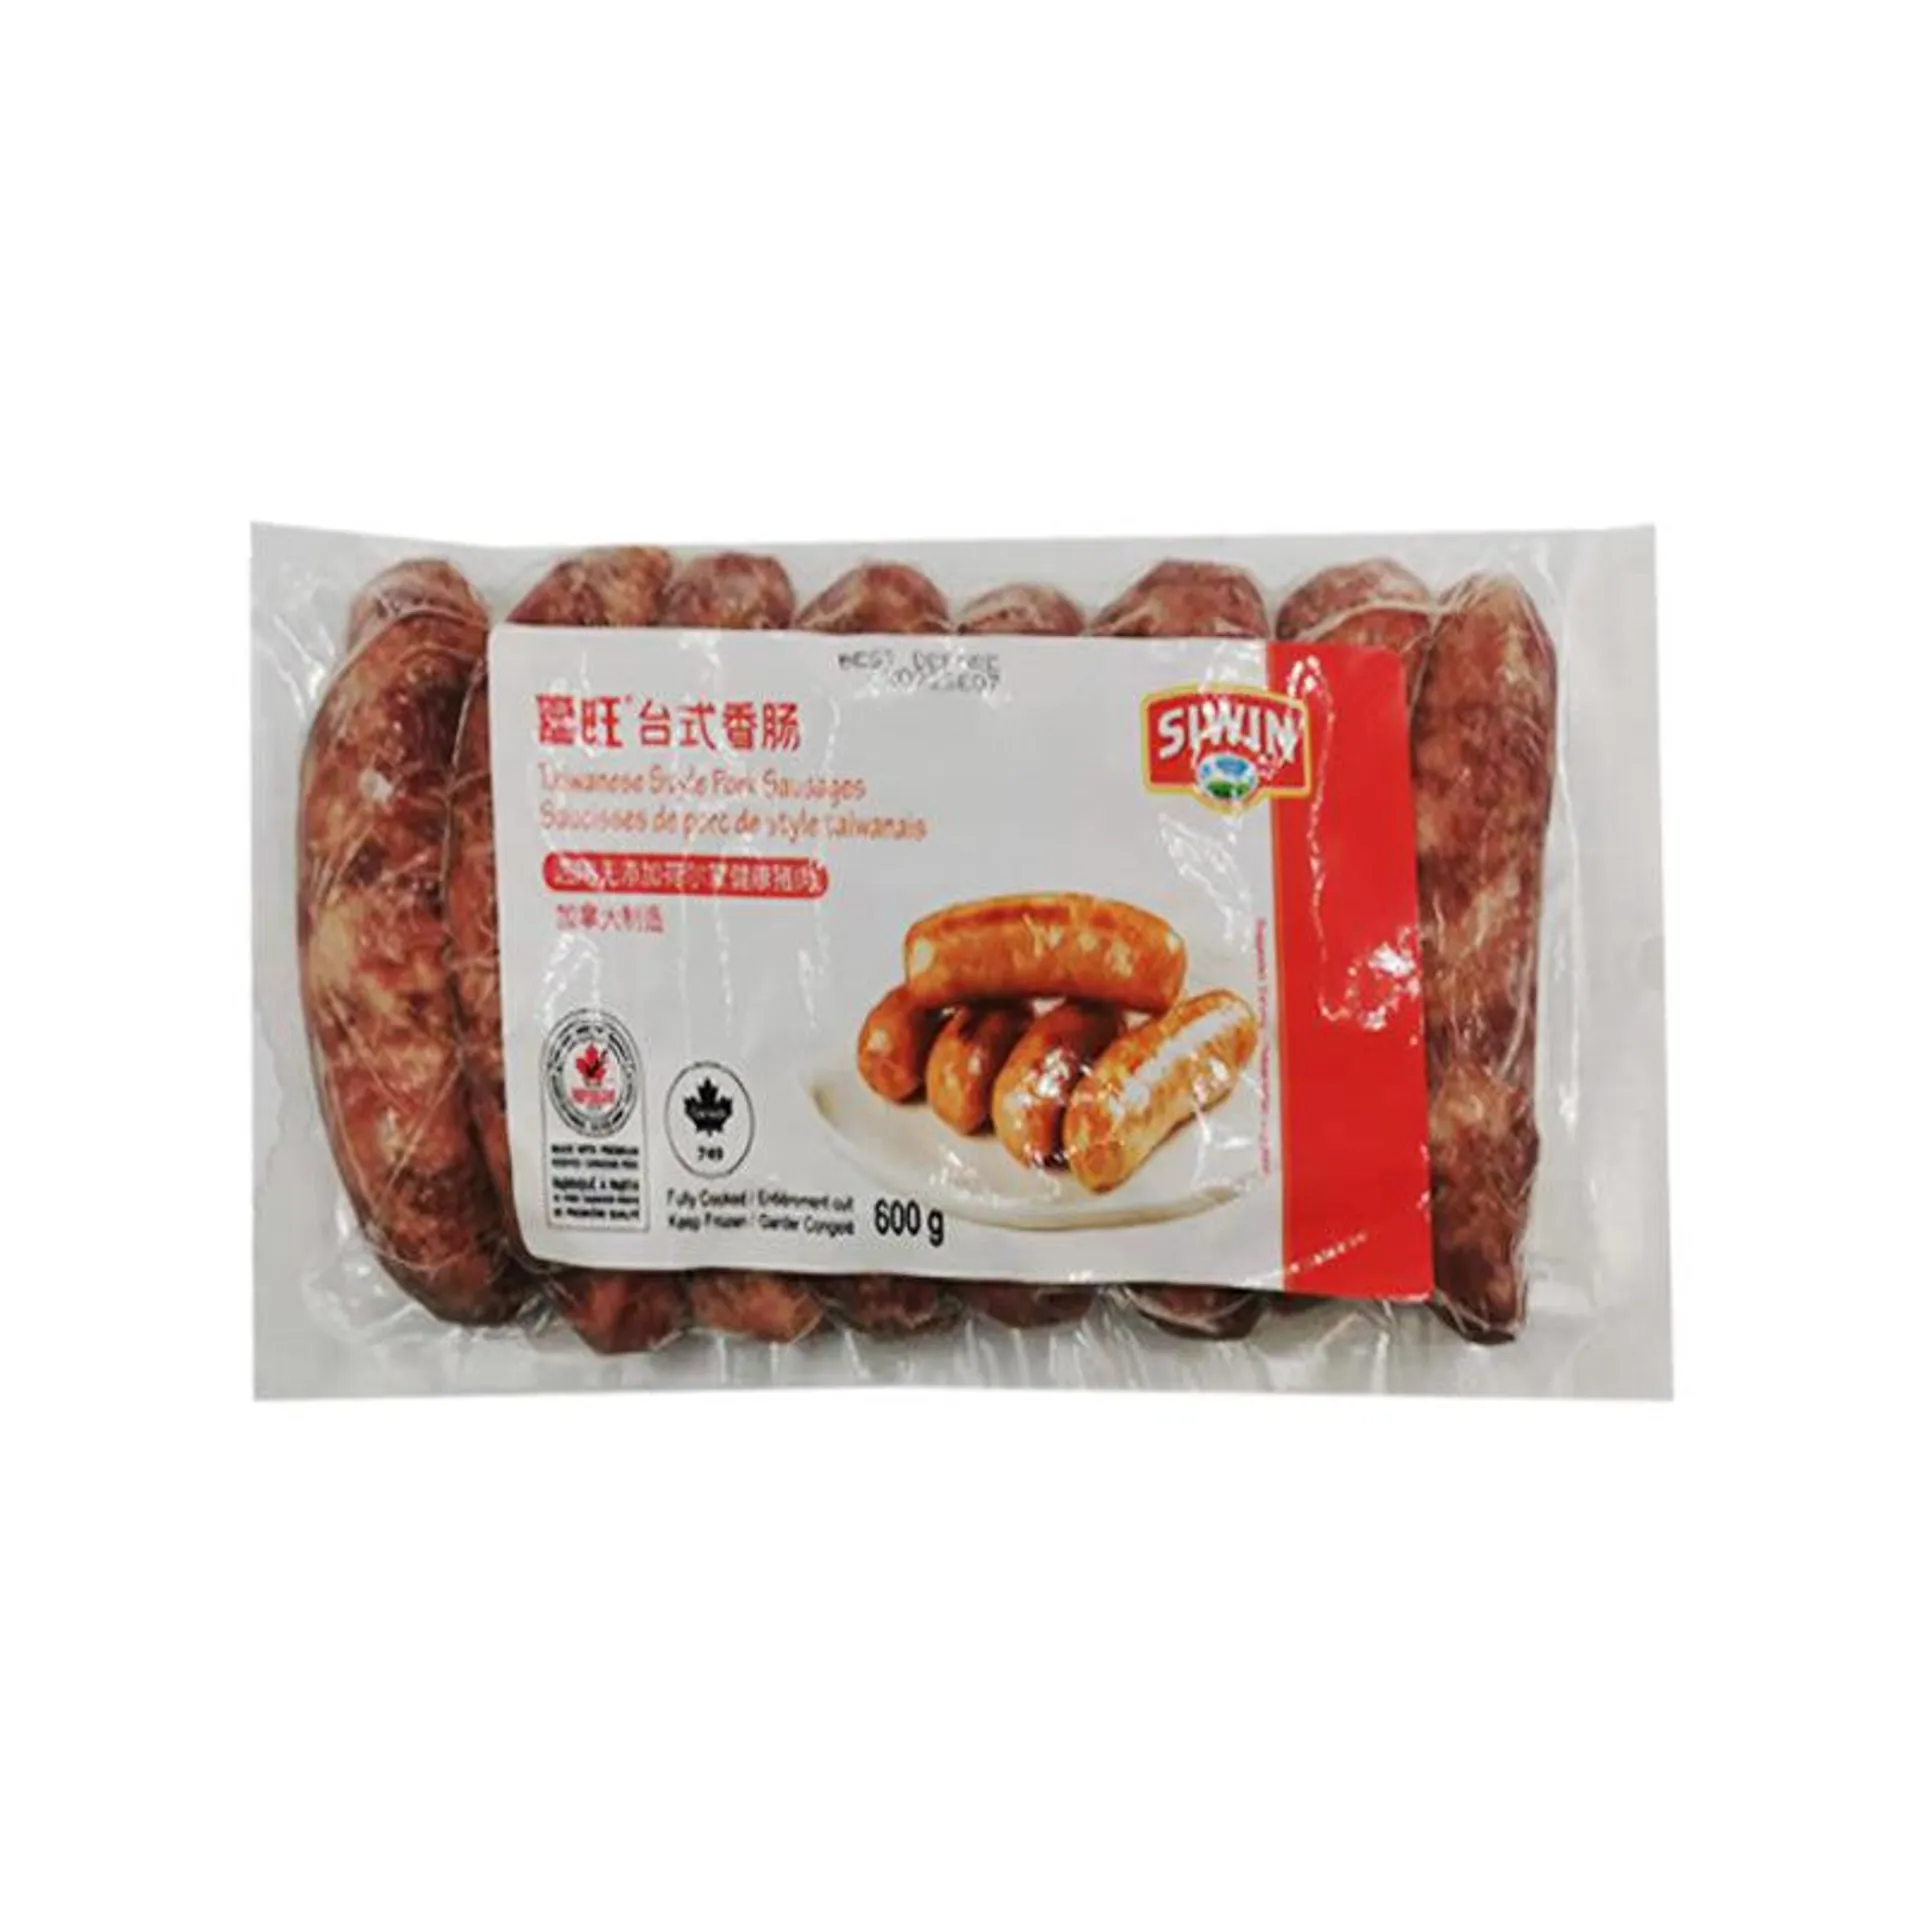 Siwin Taiwanese Style Pork Sausages 600g